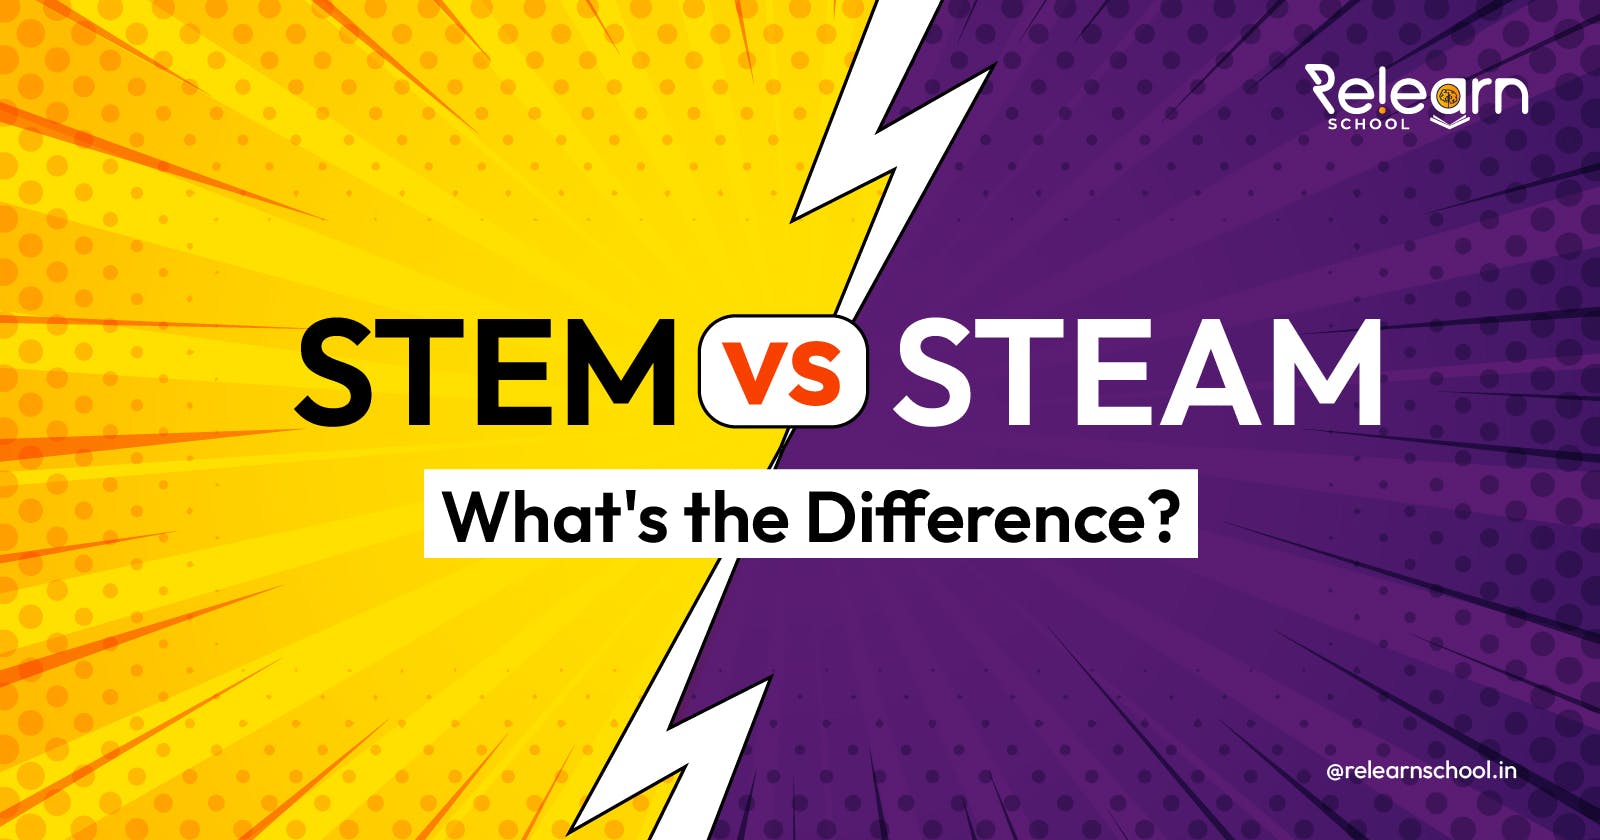 STEM vs STEAM- What's the Difference?